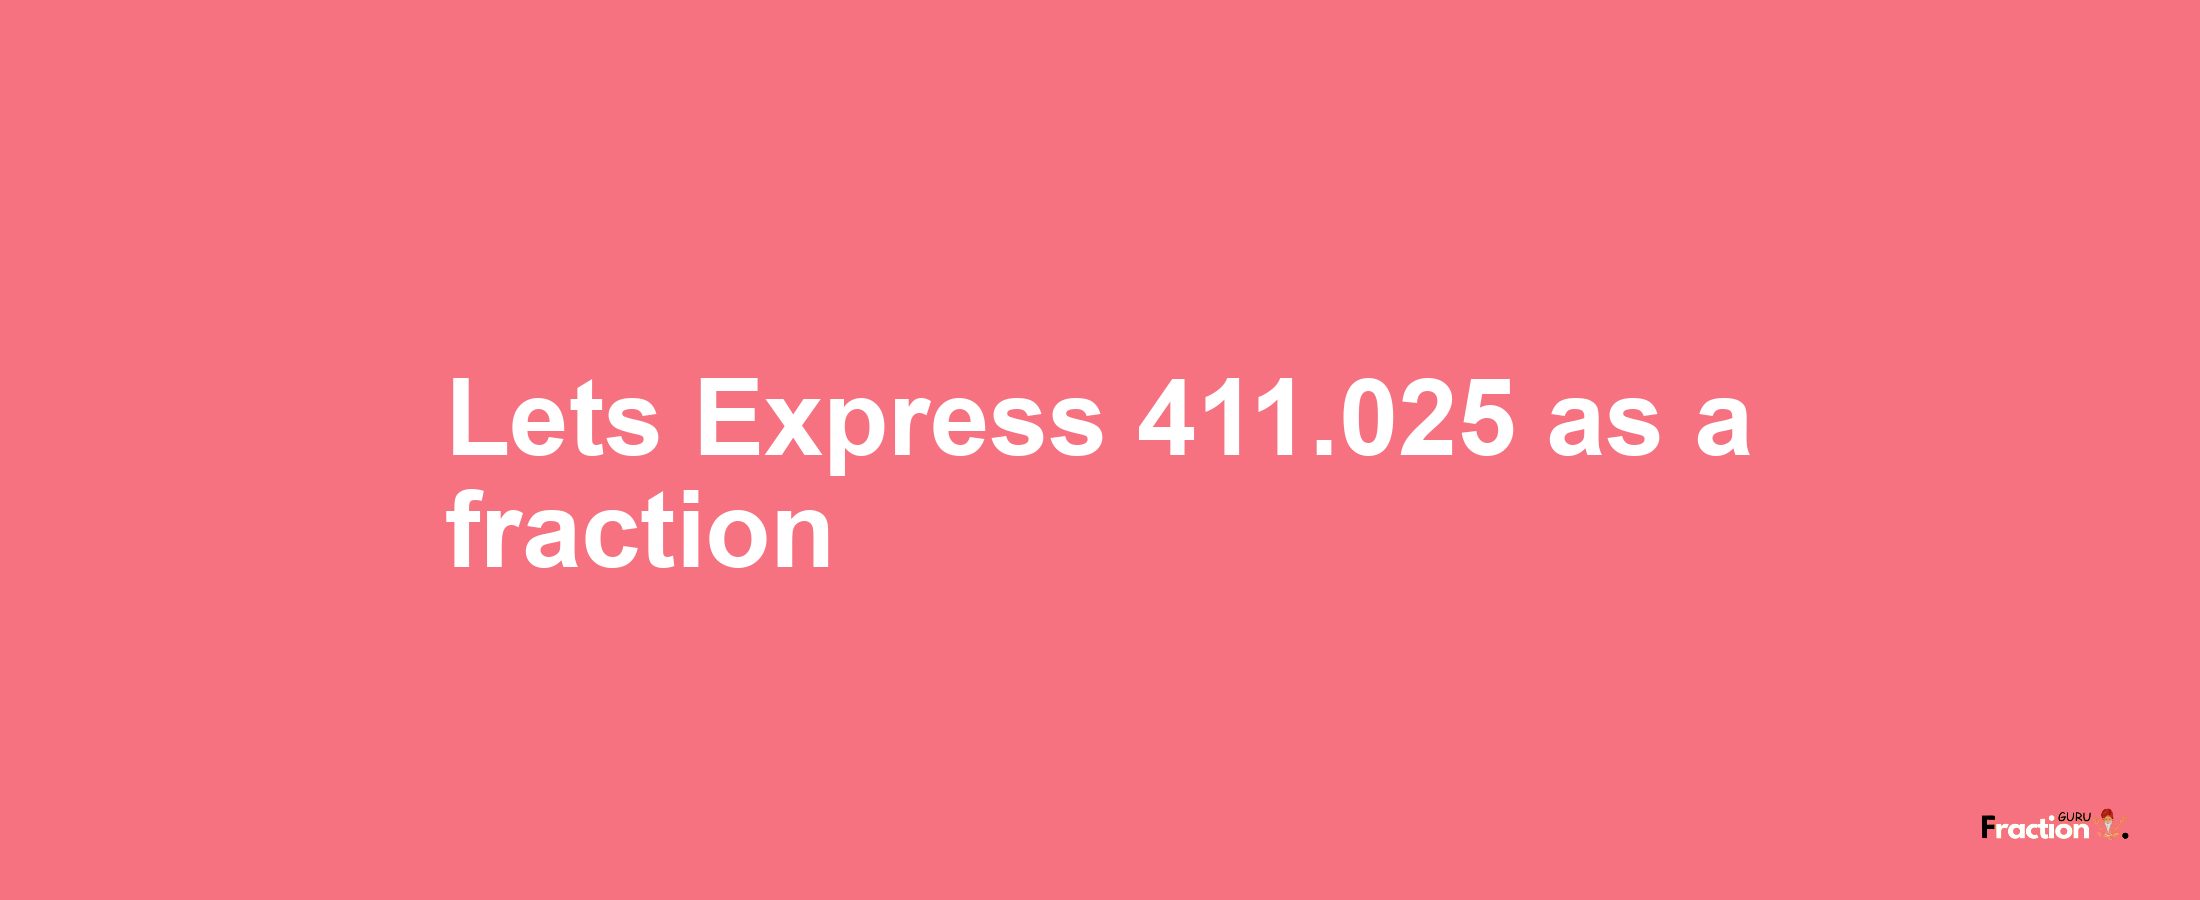 Lets Express 411.025 as afraction